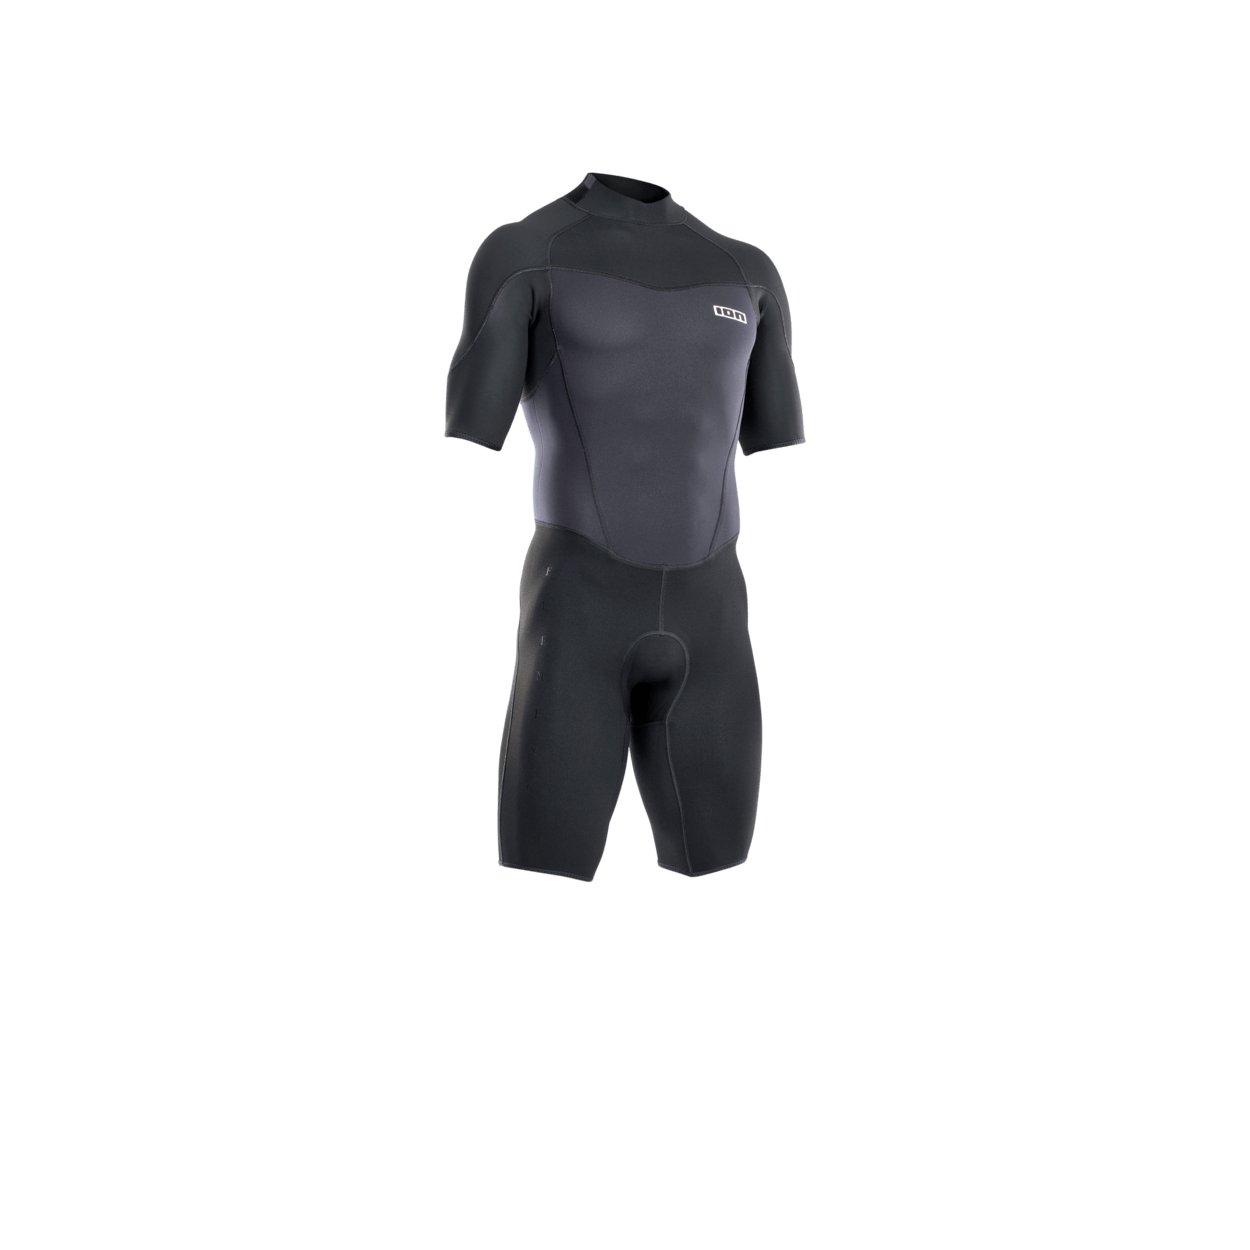 ION Men Wetsuit Element 2/2 Shorty Shortsleeve Back Zip 2022 - Worthing Watersports - 9008415951680 - Wetsuits - ION Water